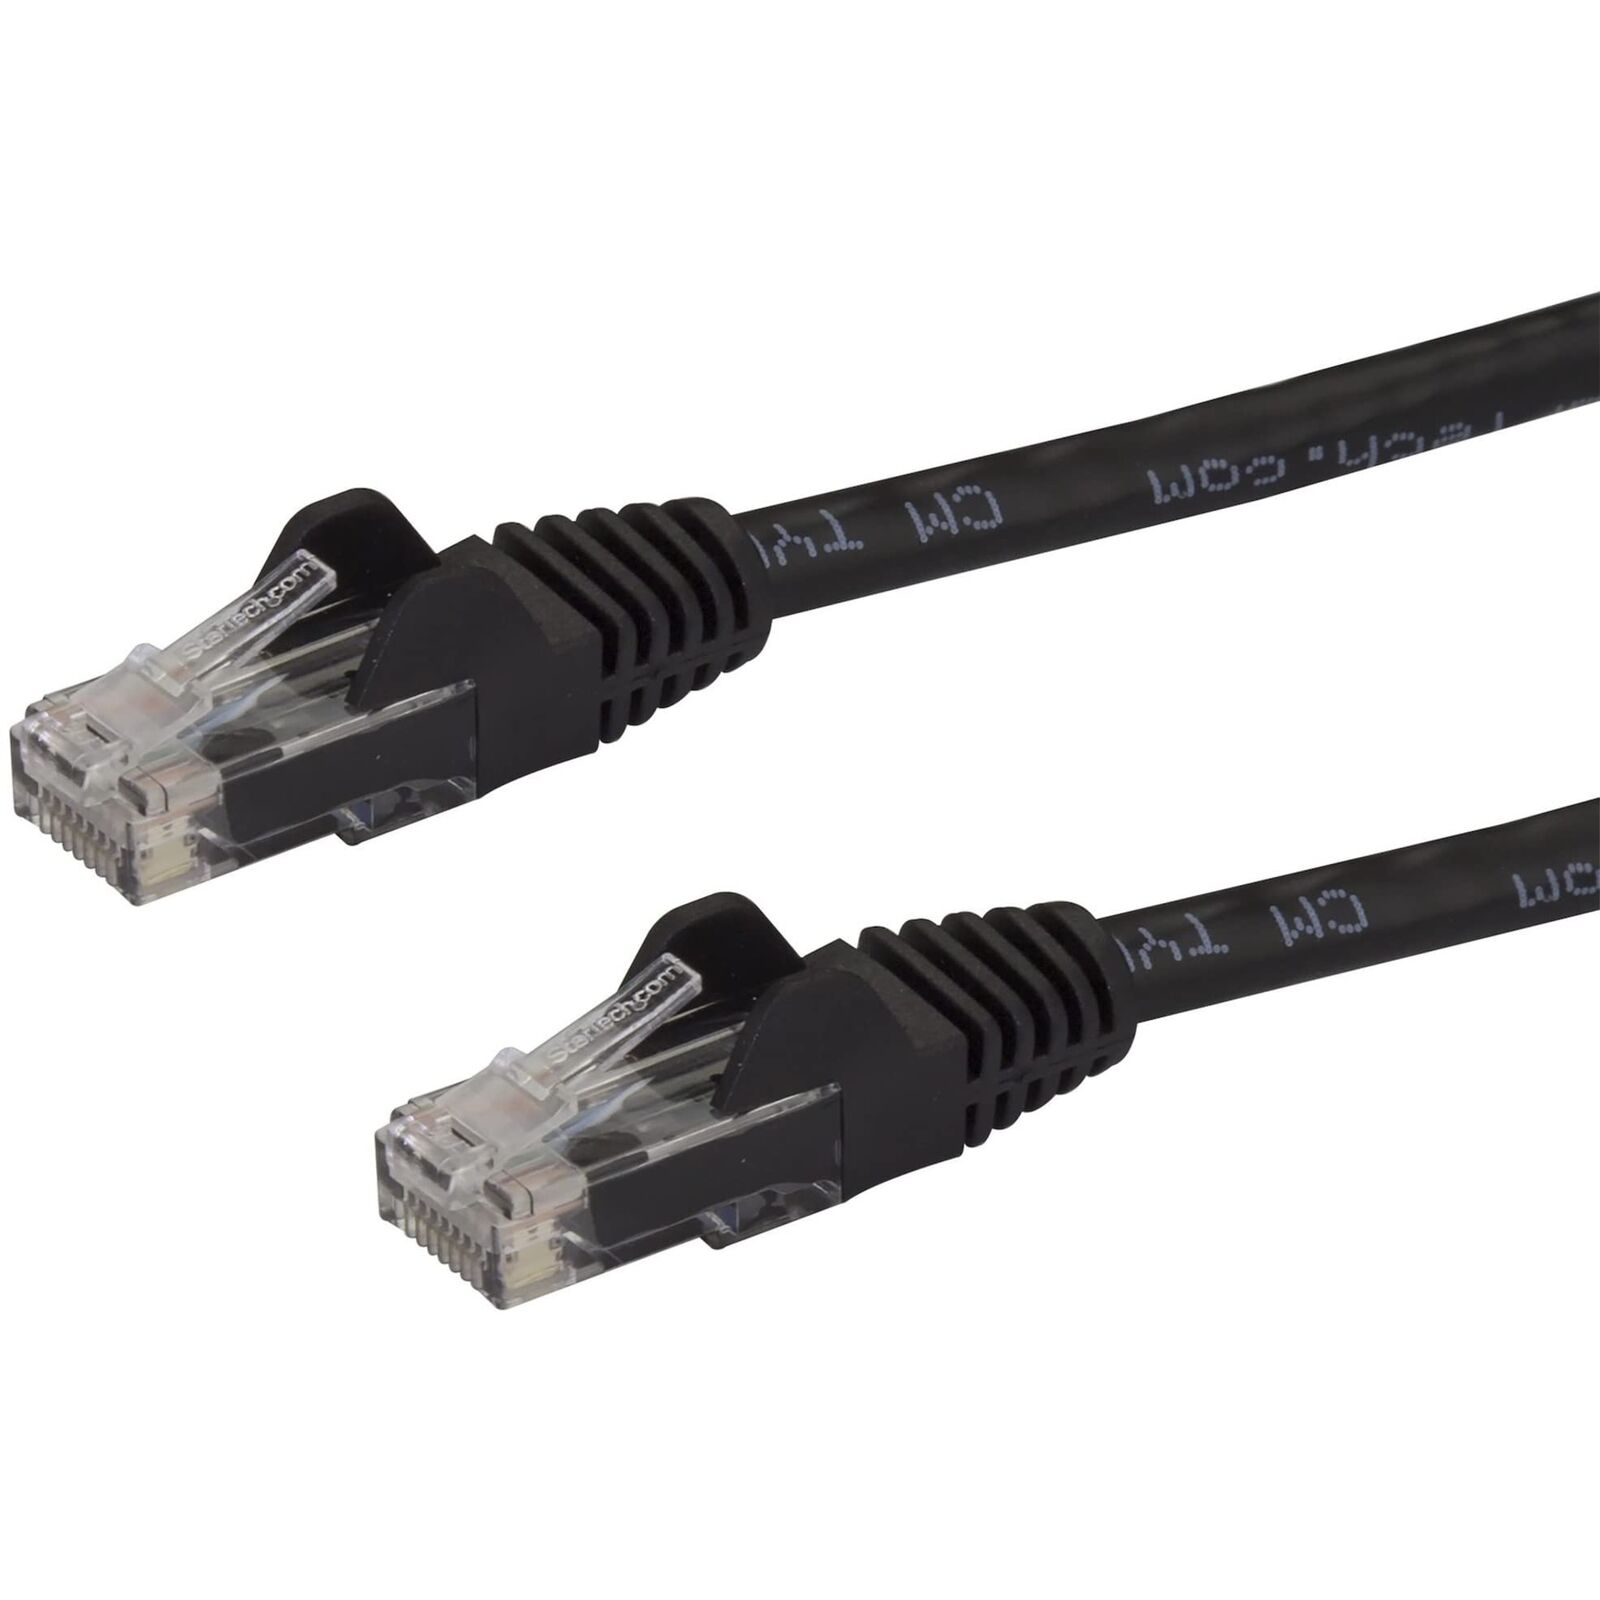 StarTech.com Cat6 Ethernet Cable - 100 ft - Black - Patch Cable - Snagless Cat6 